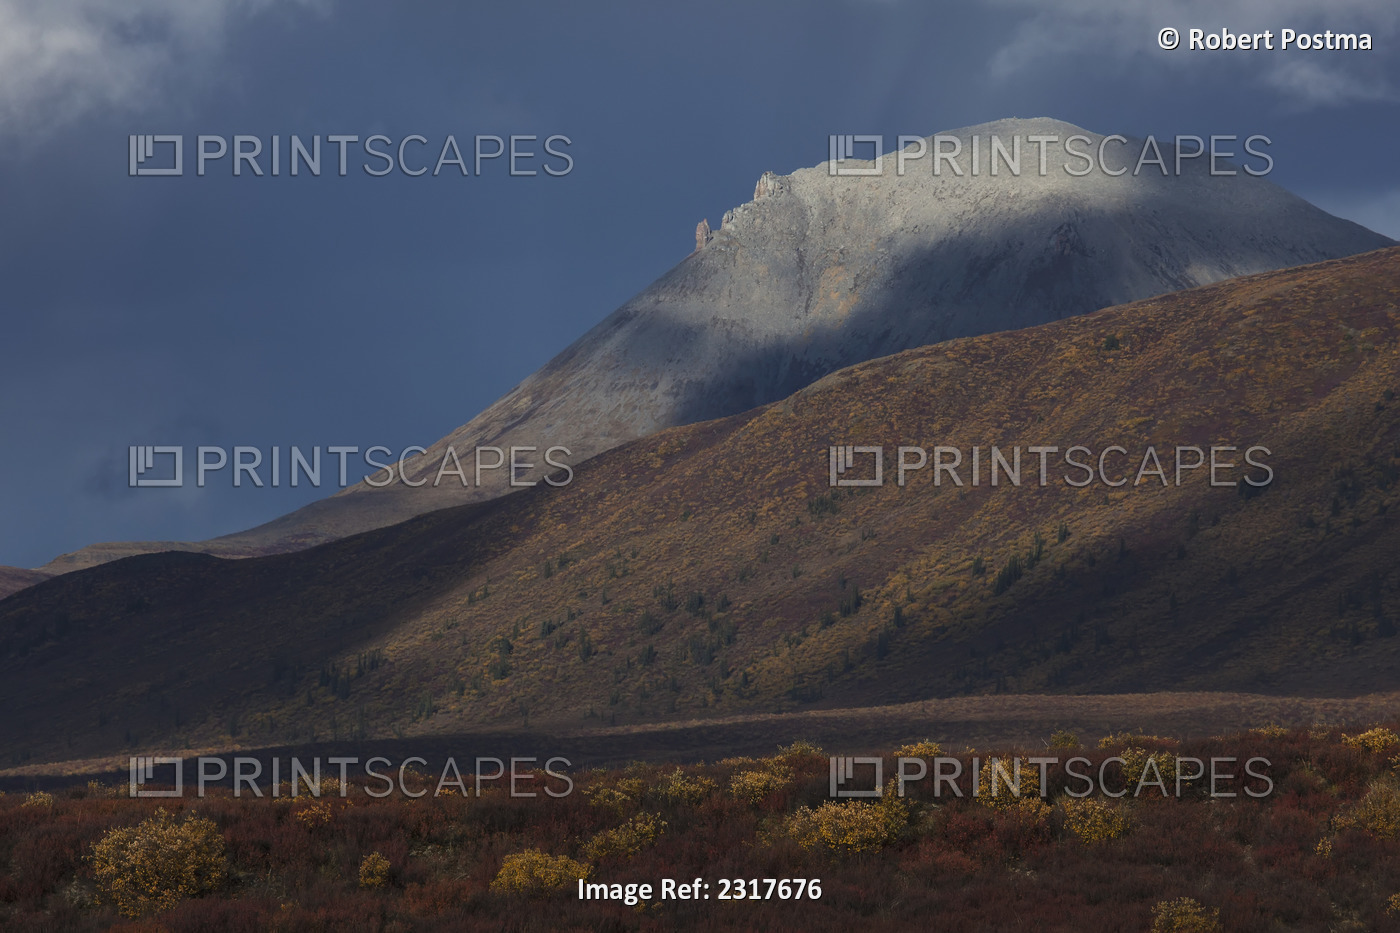 The mountains along the dempster highway are illuminated in dramatic storm ...